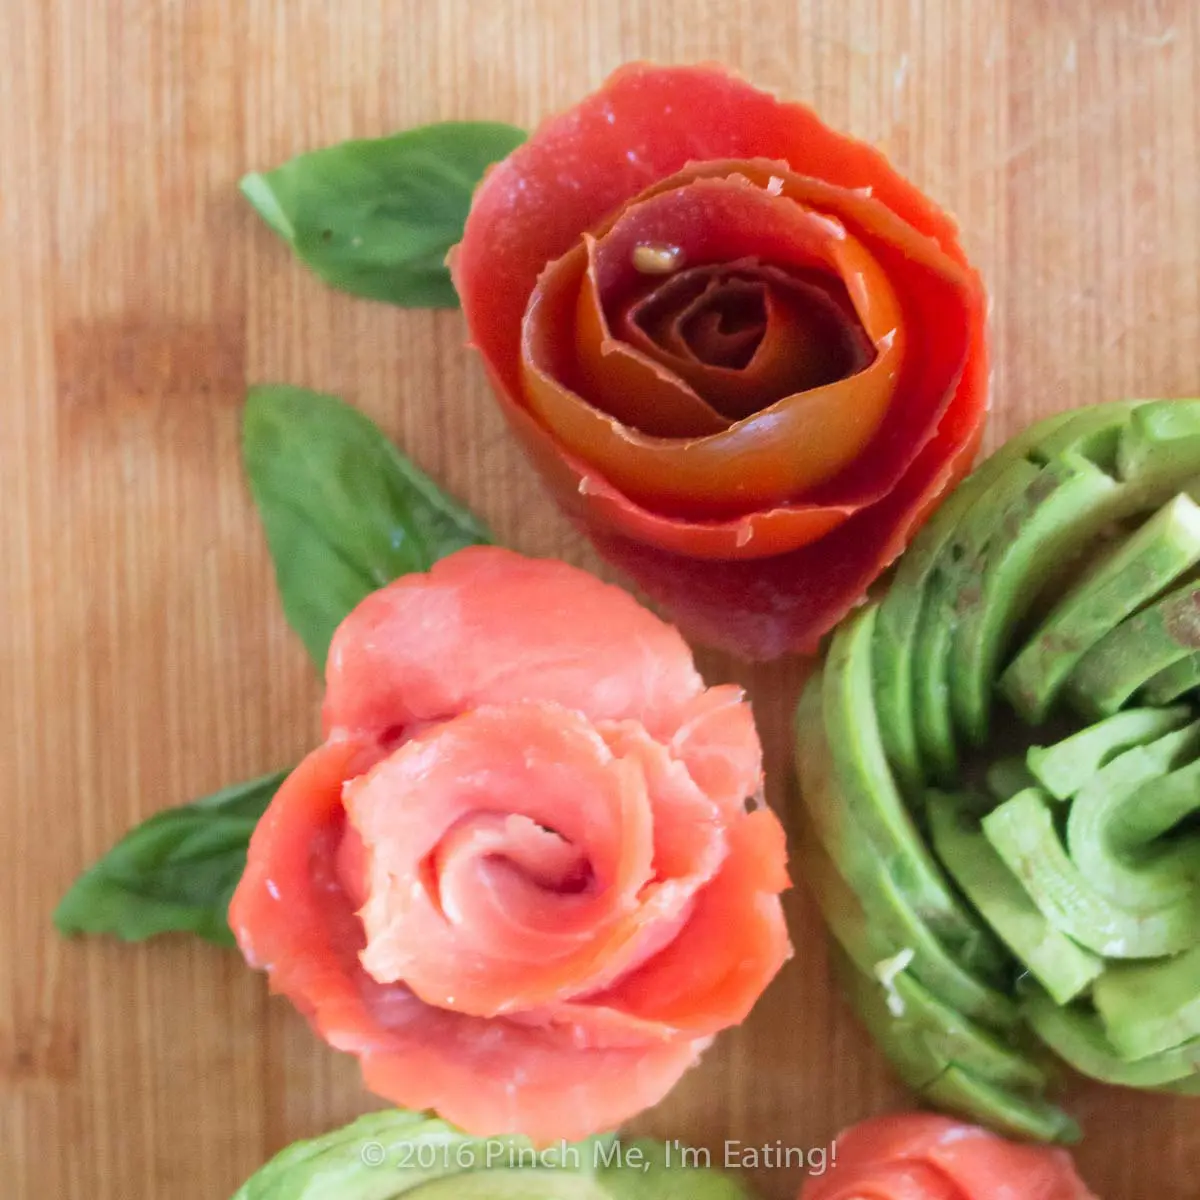 Edible smoked salmon, tomato, and avocado roses on a wooden cutting board.